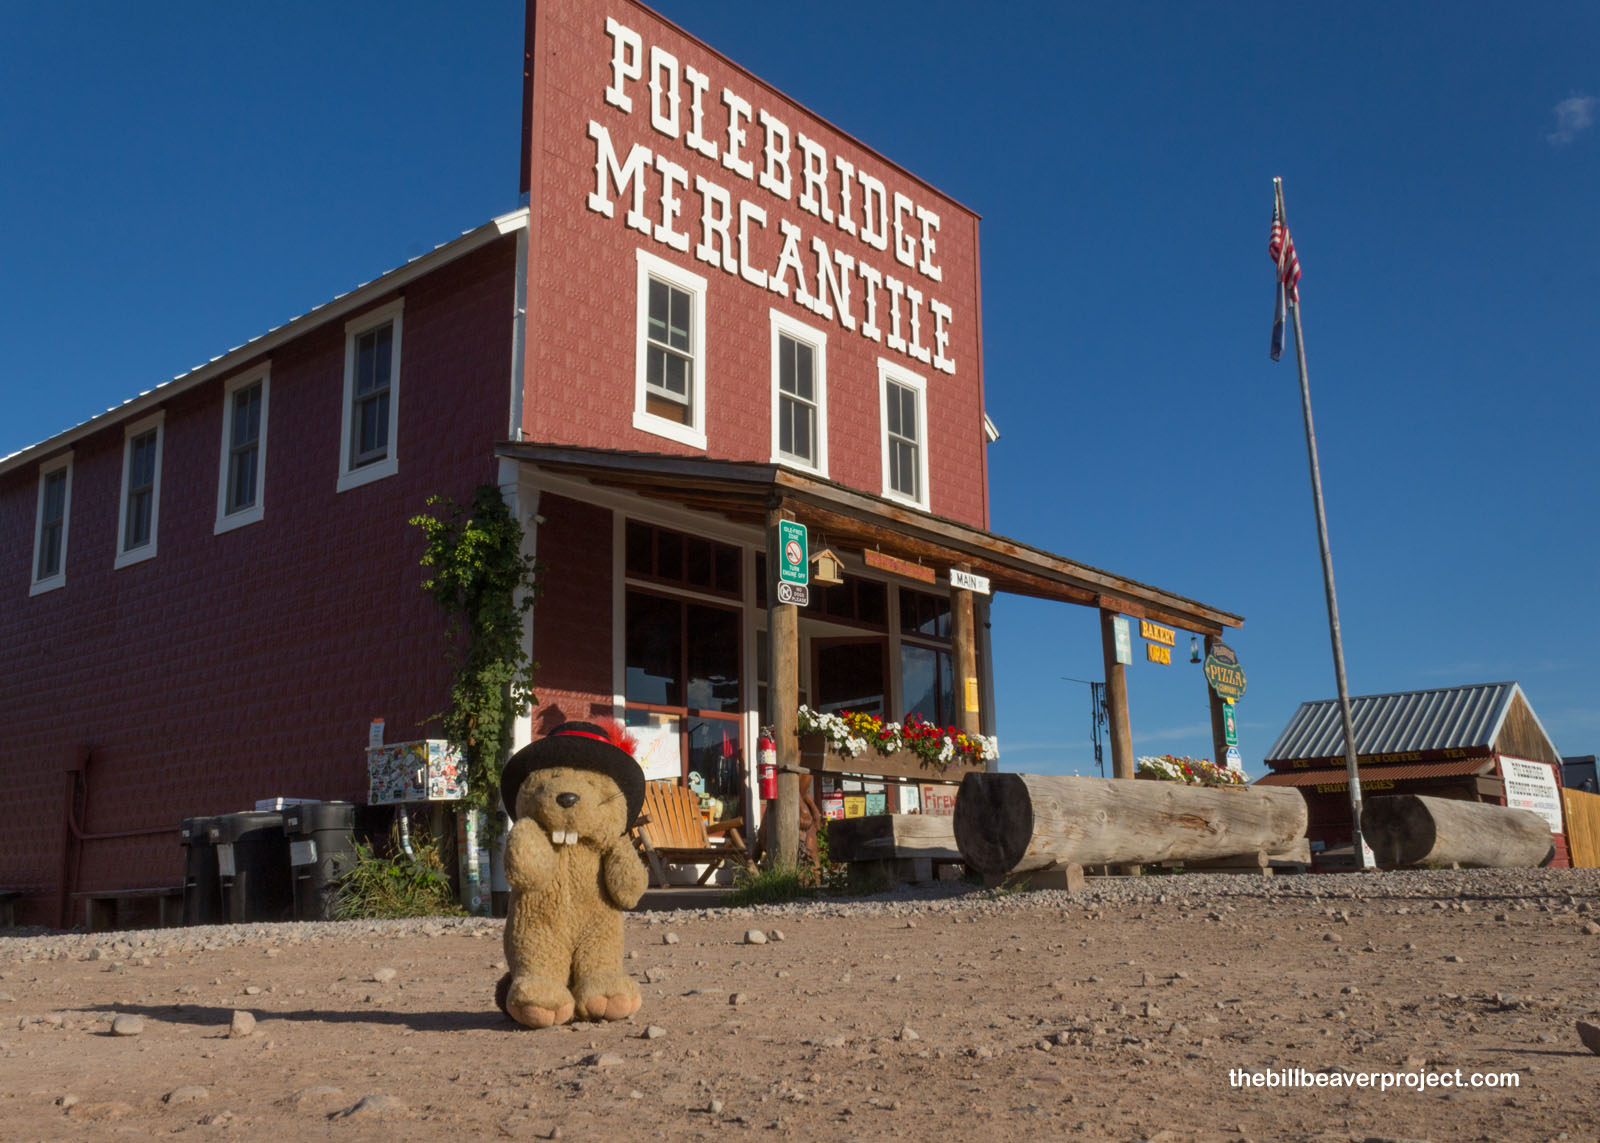 A side view of the famous mercantile!